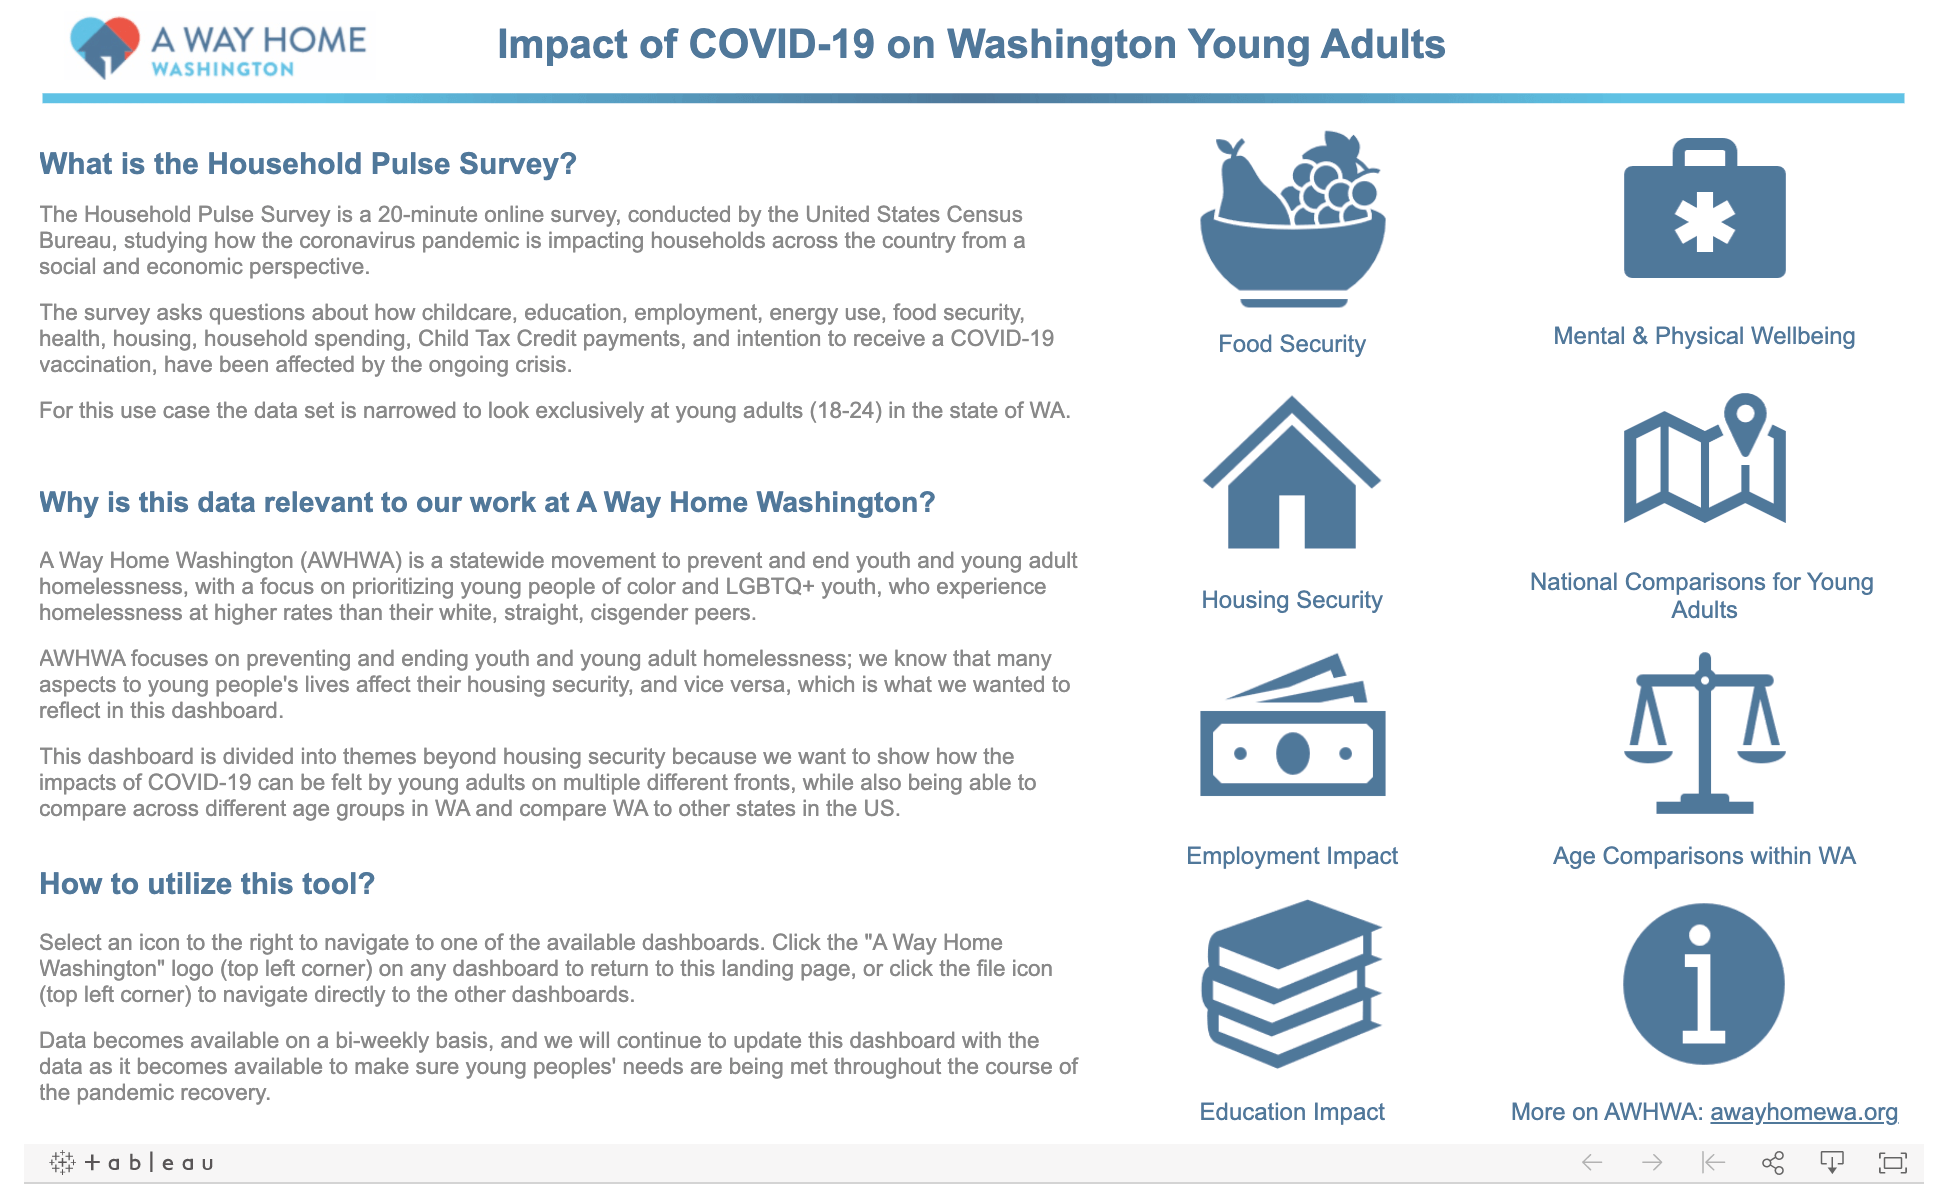 A Tableau dashboard is helping counties in Washington state visualize and track progress toward ending youth homelessness.